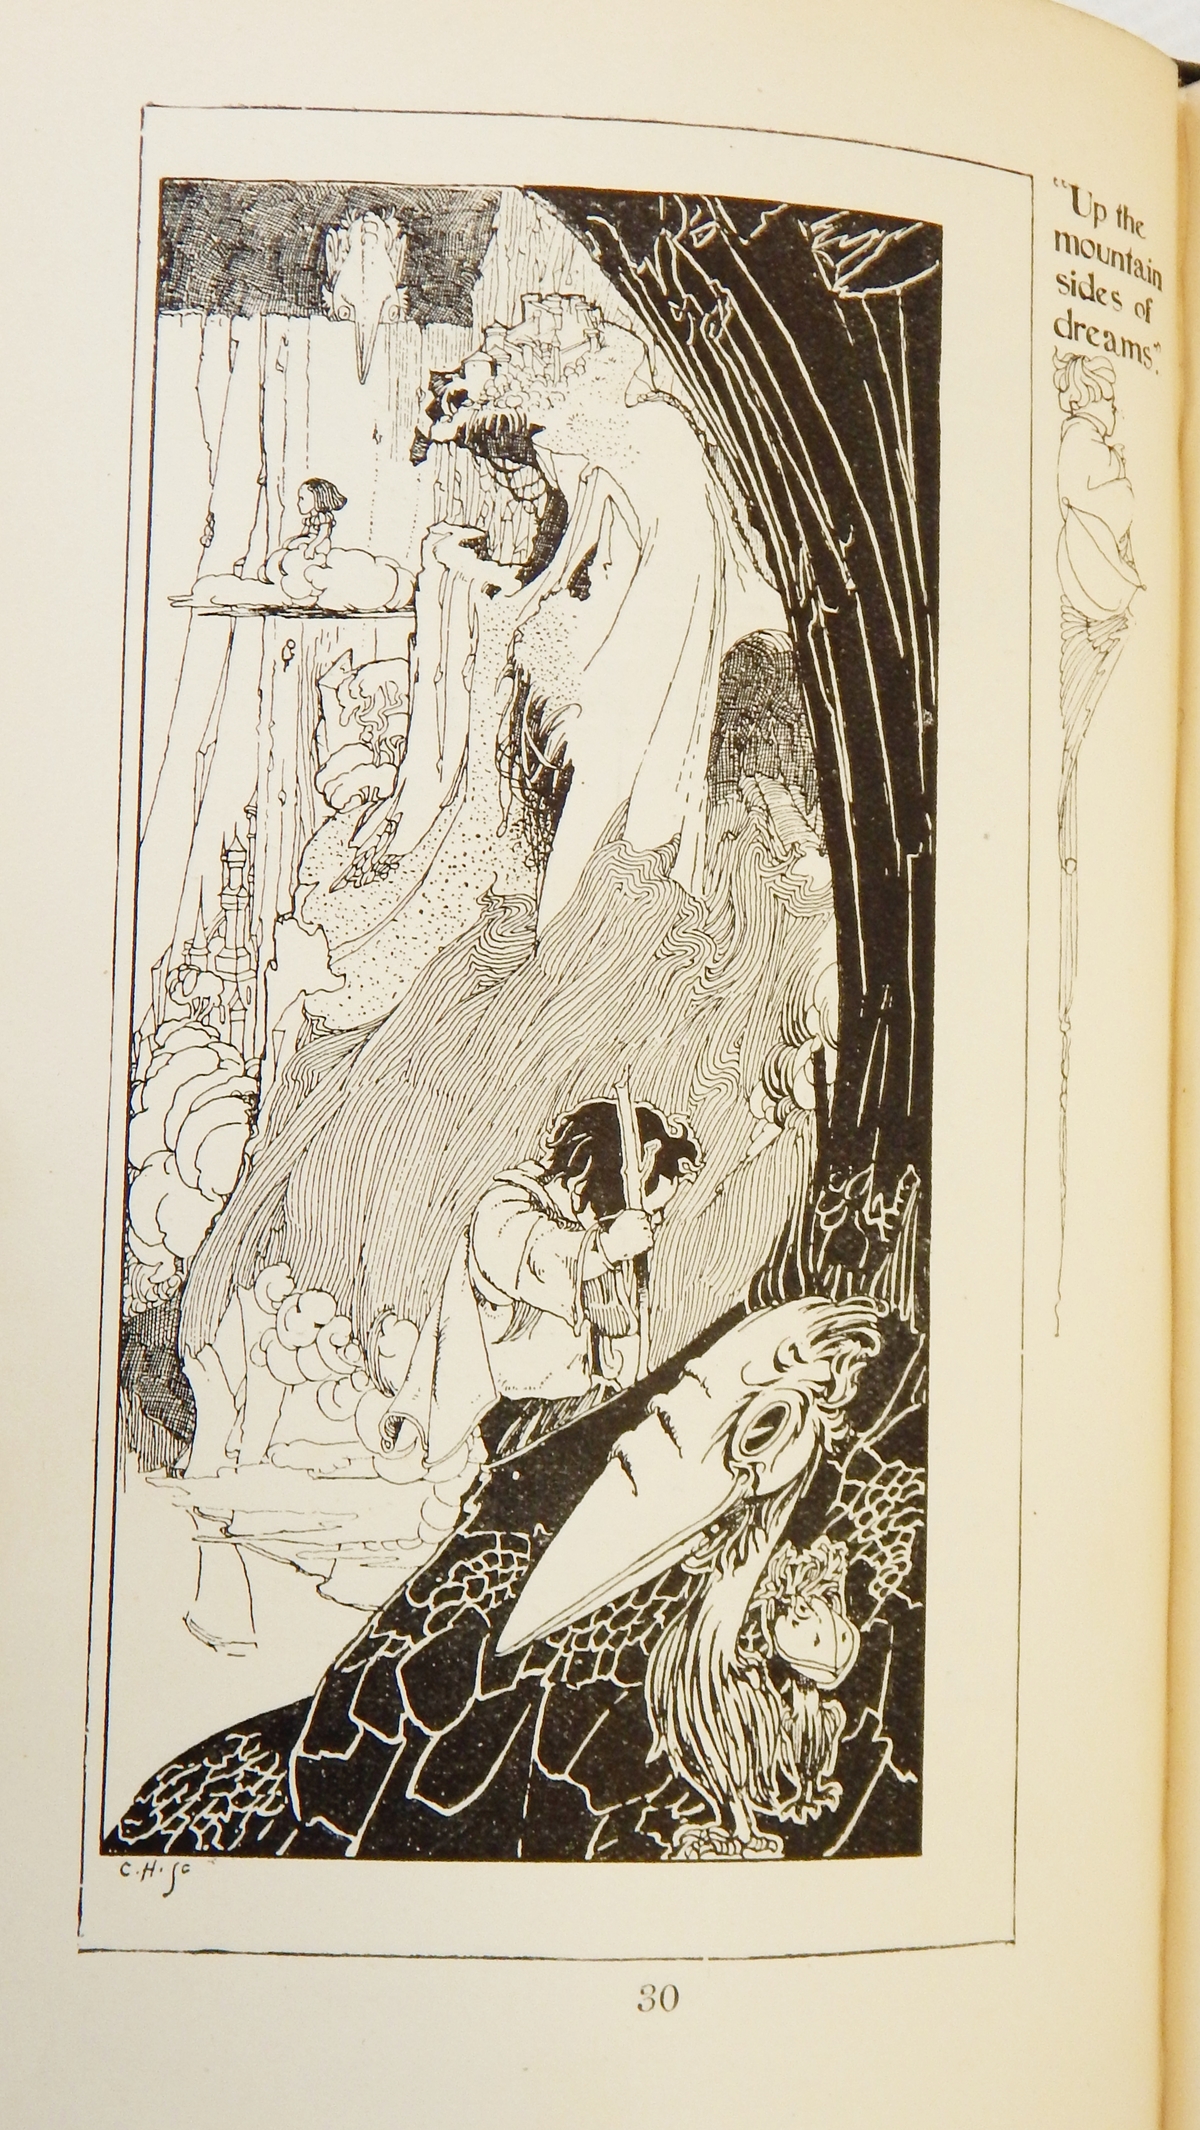 Stevenson, Robert Louis "A Child's Garden of Verses", illustrated by Charles Robinson, - Image 3 of 3